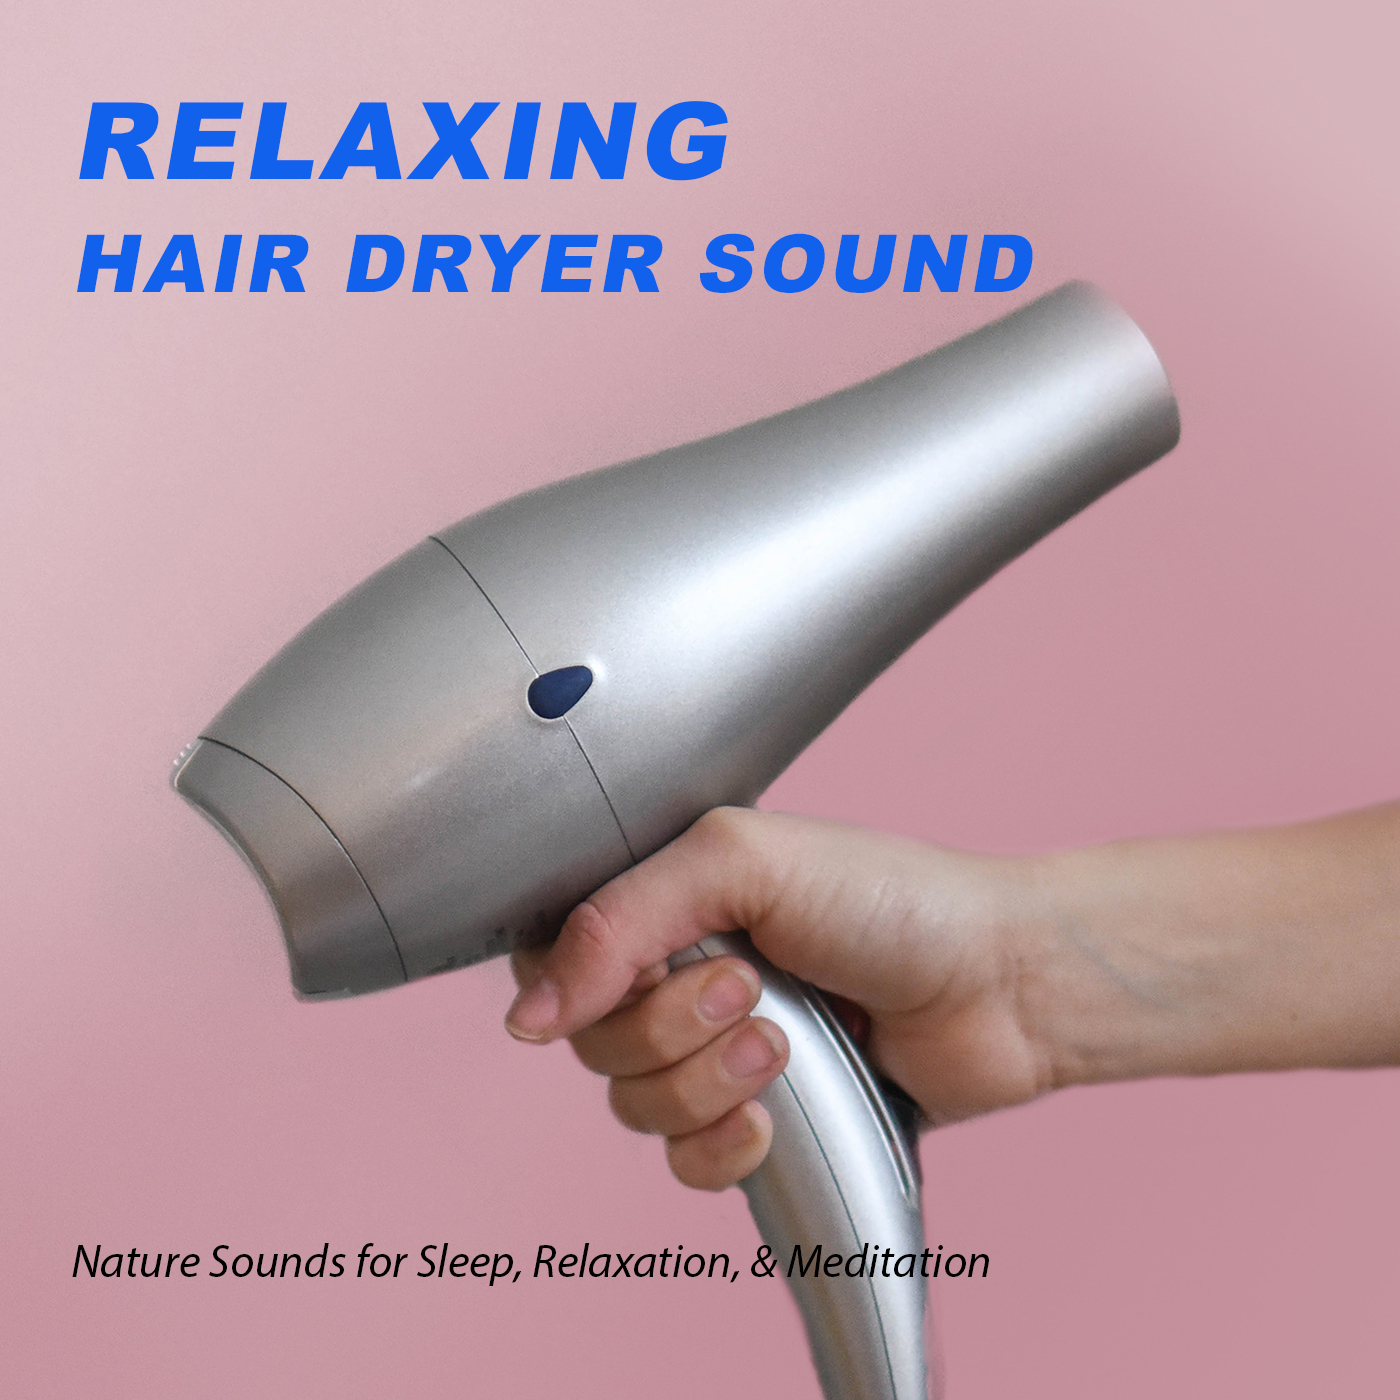 Relaxing Hair Dryer Sound - Nature Sounds for Relaxation, Meditation, Studying & Deep Sleep- 2